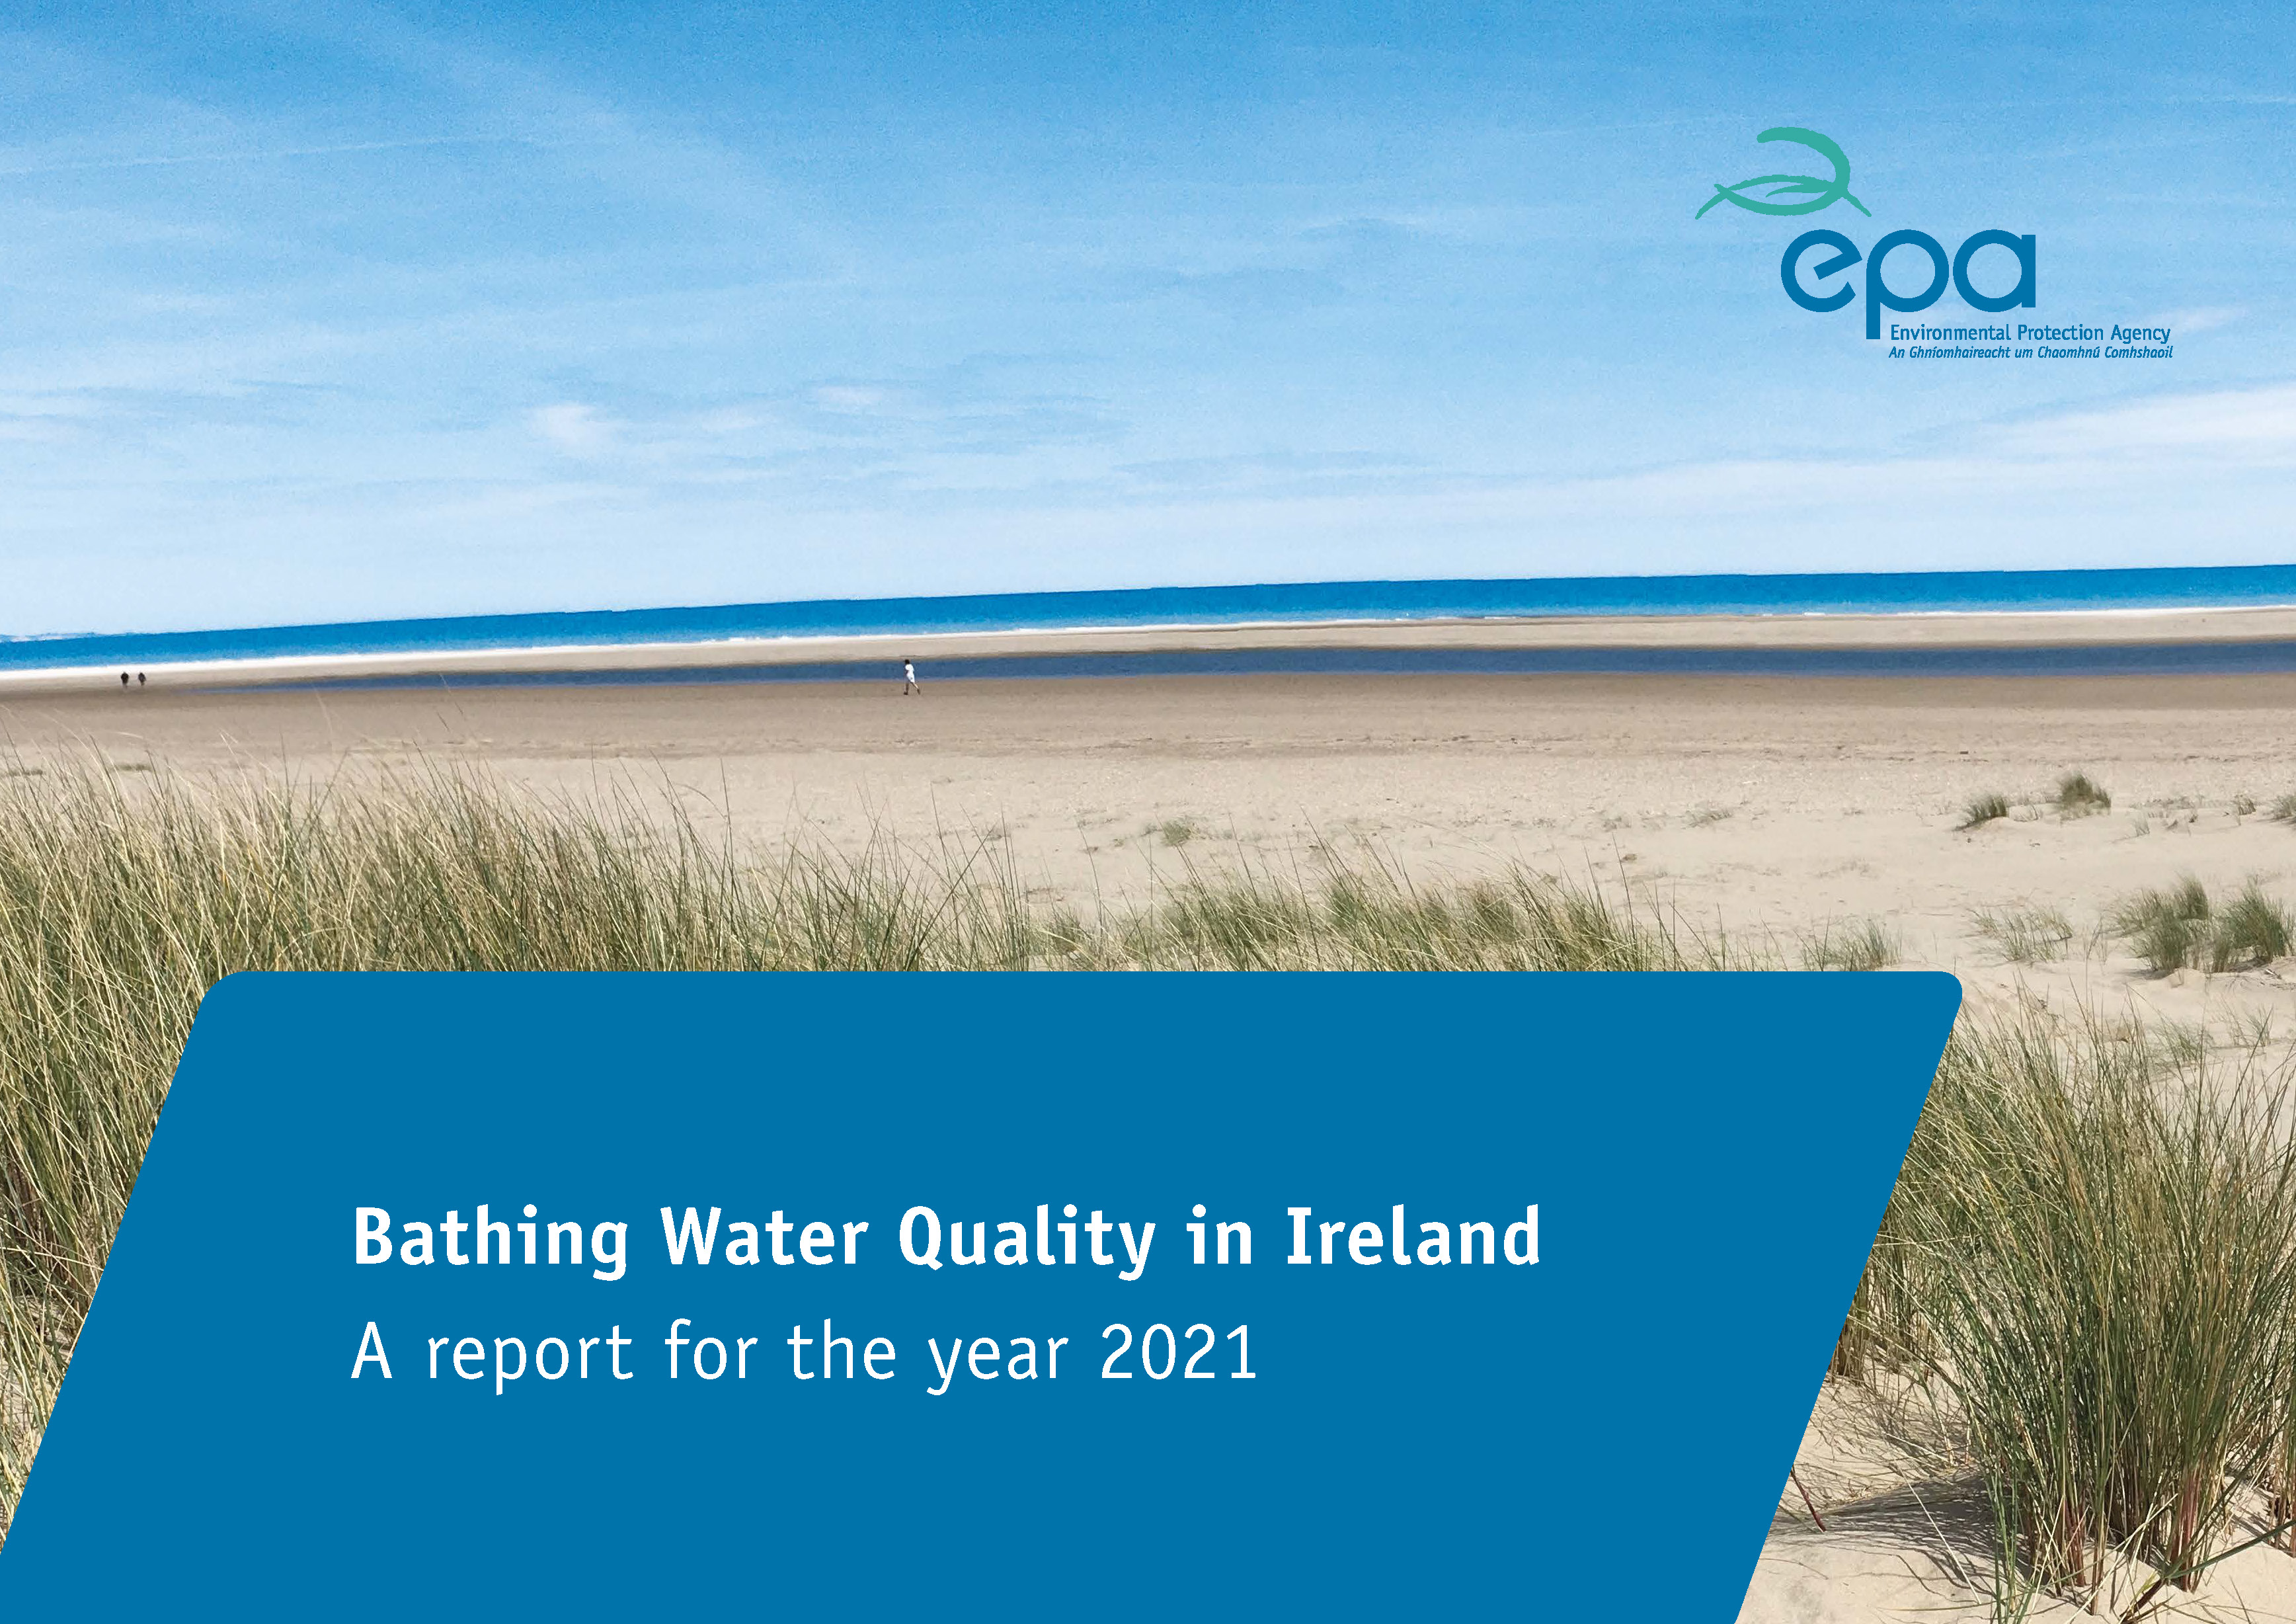 Bathing Water Quality 2021 report cover - a sandy beach with water in the background is the main image, with the EPA logo and report title over that.